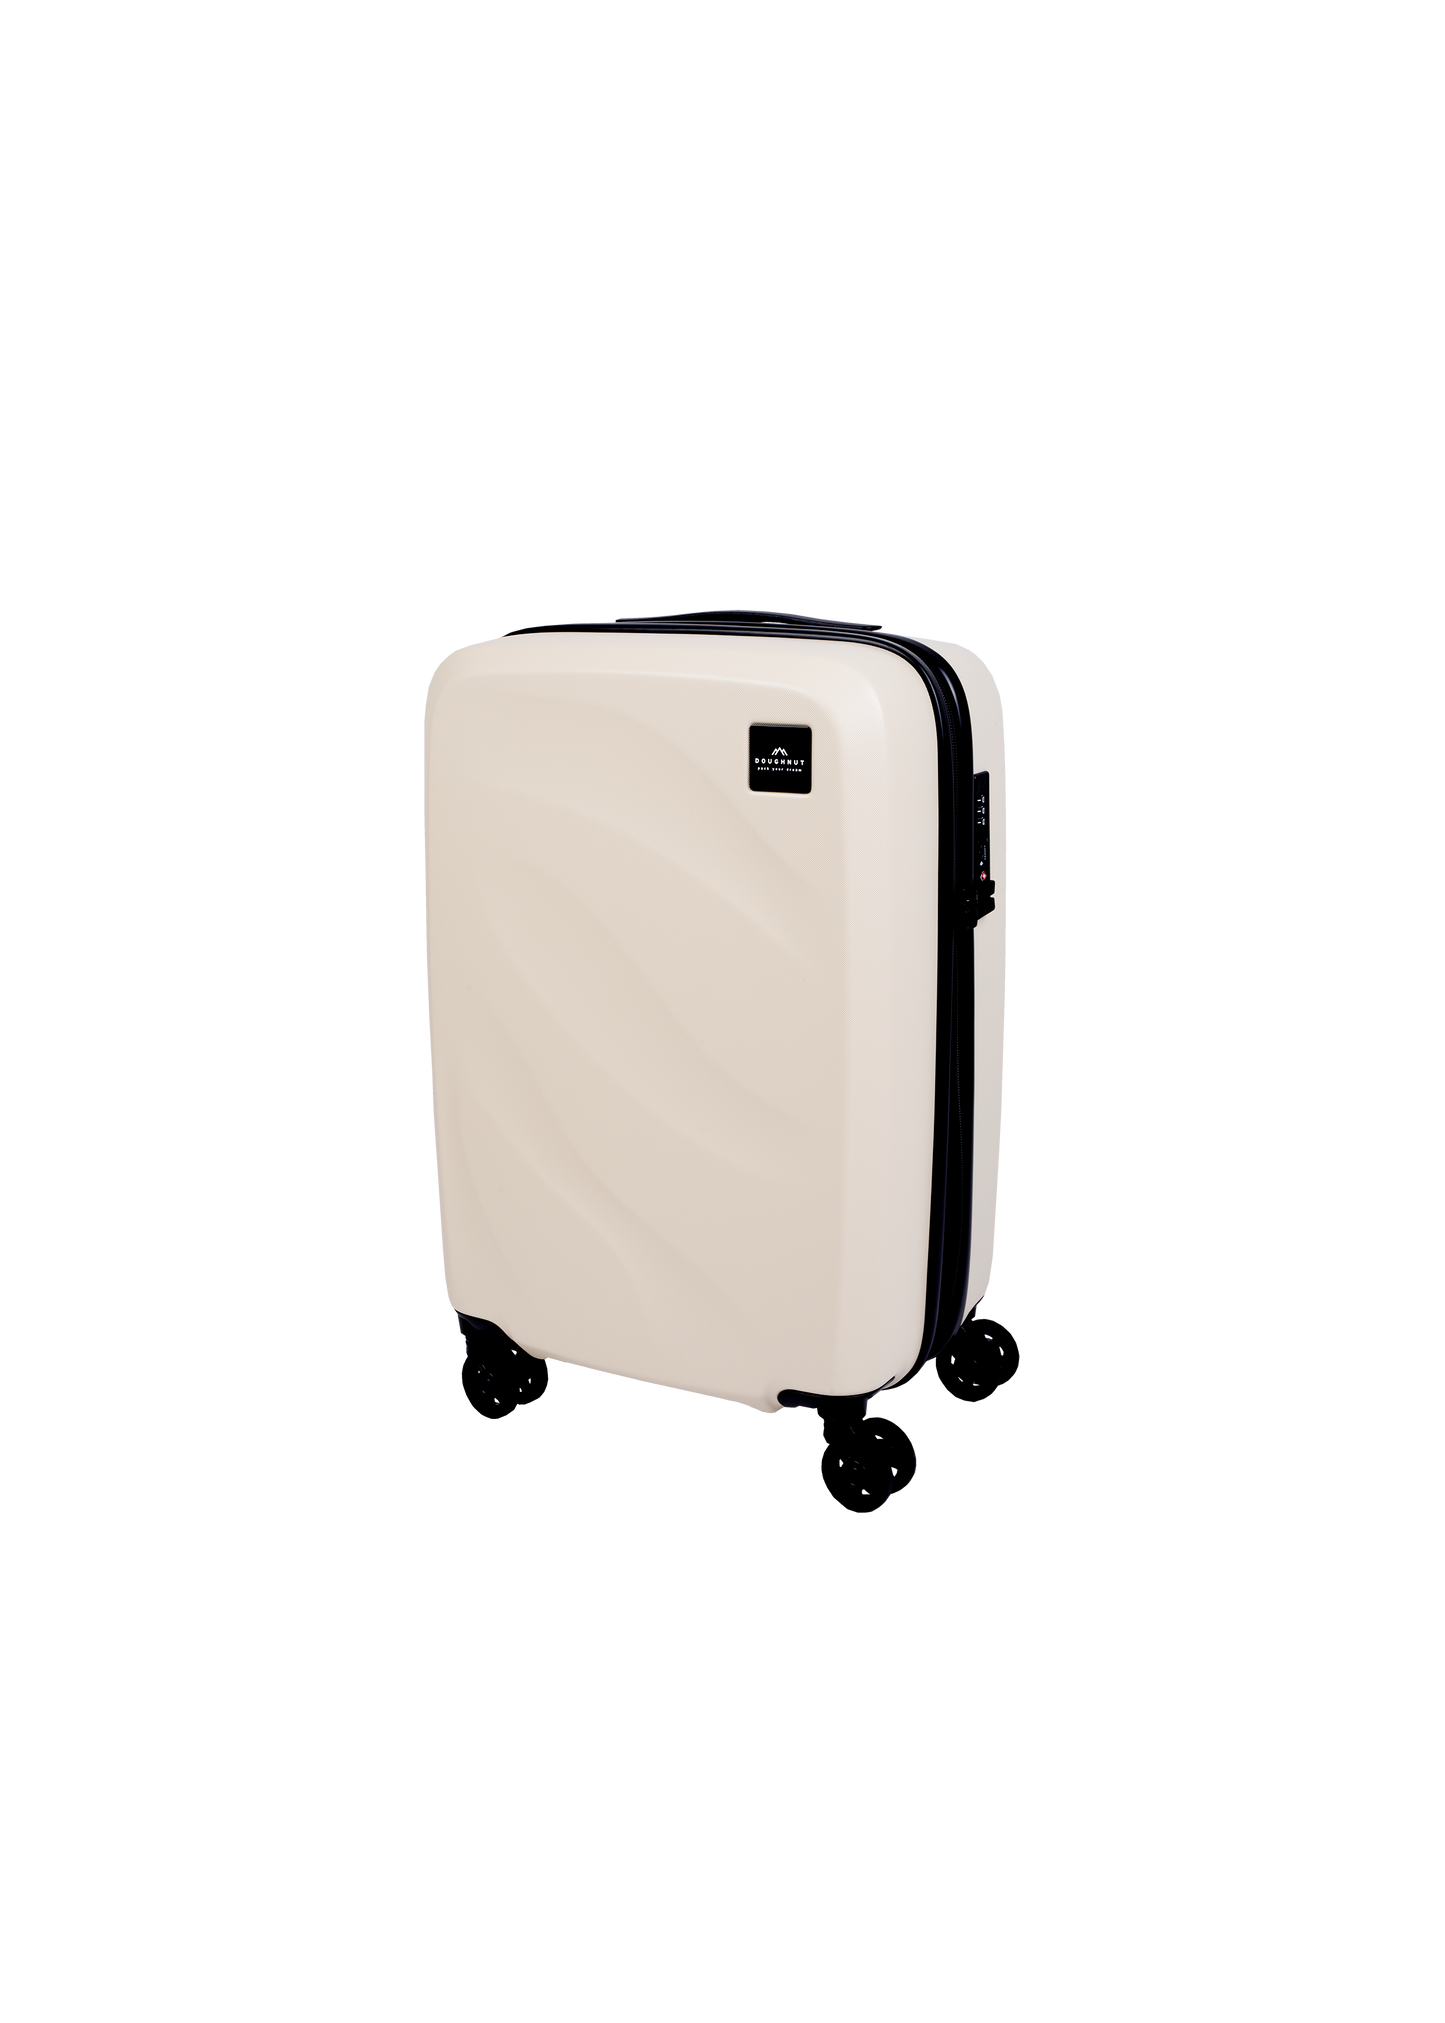 Waves Luggage Small